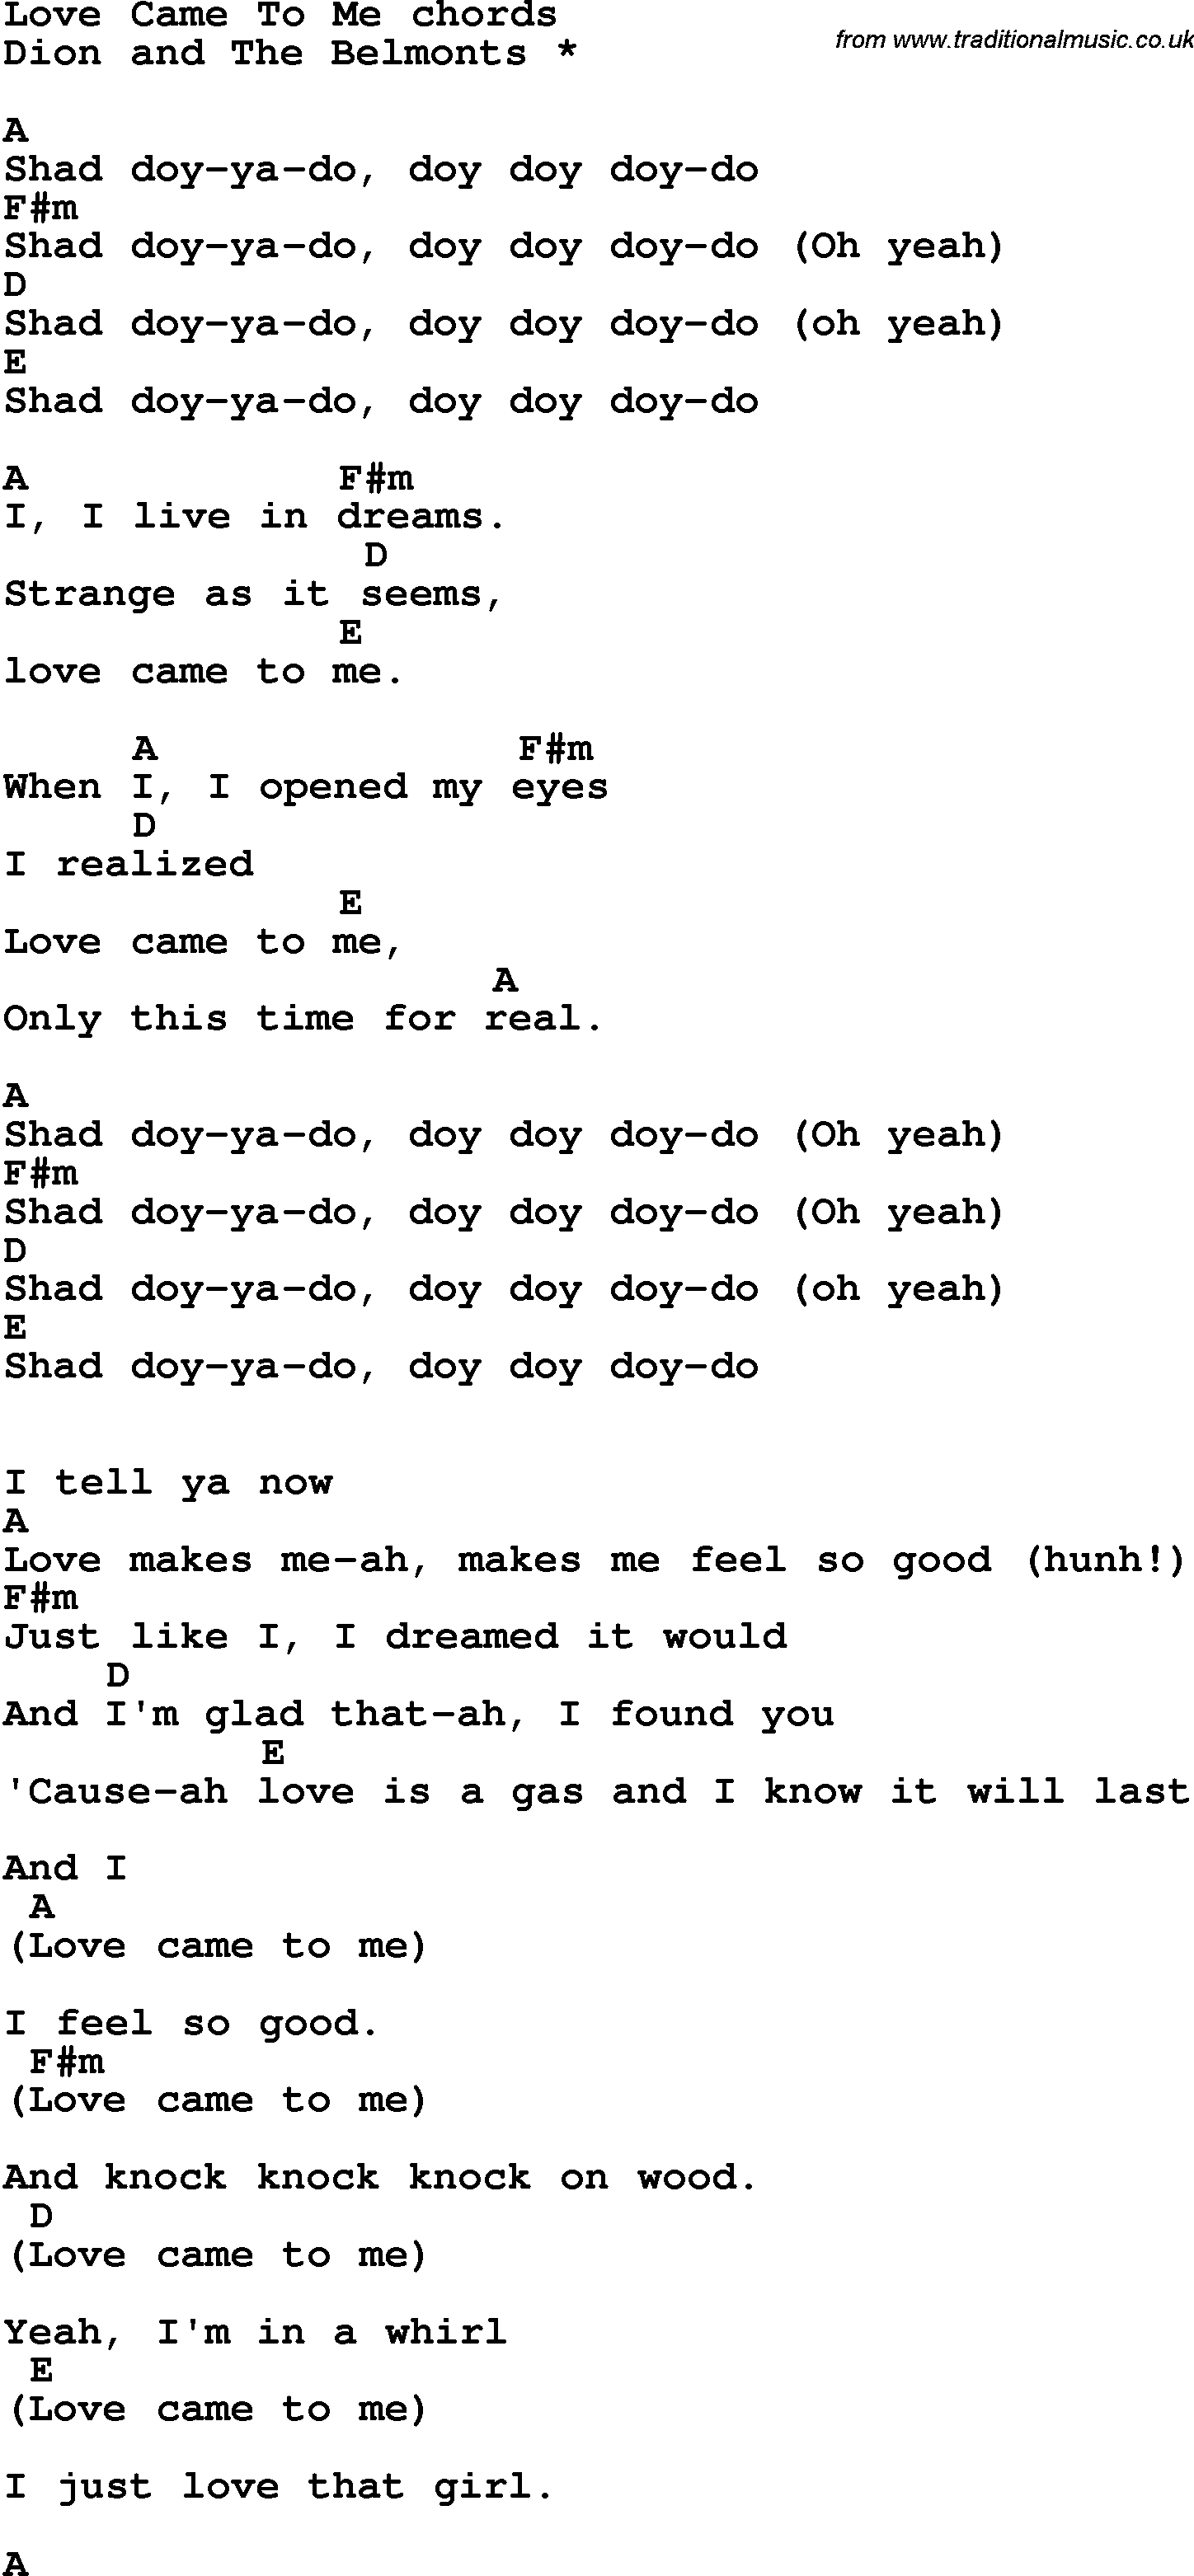 Song Lyrics with guitar chords for Love Came To Mea